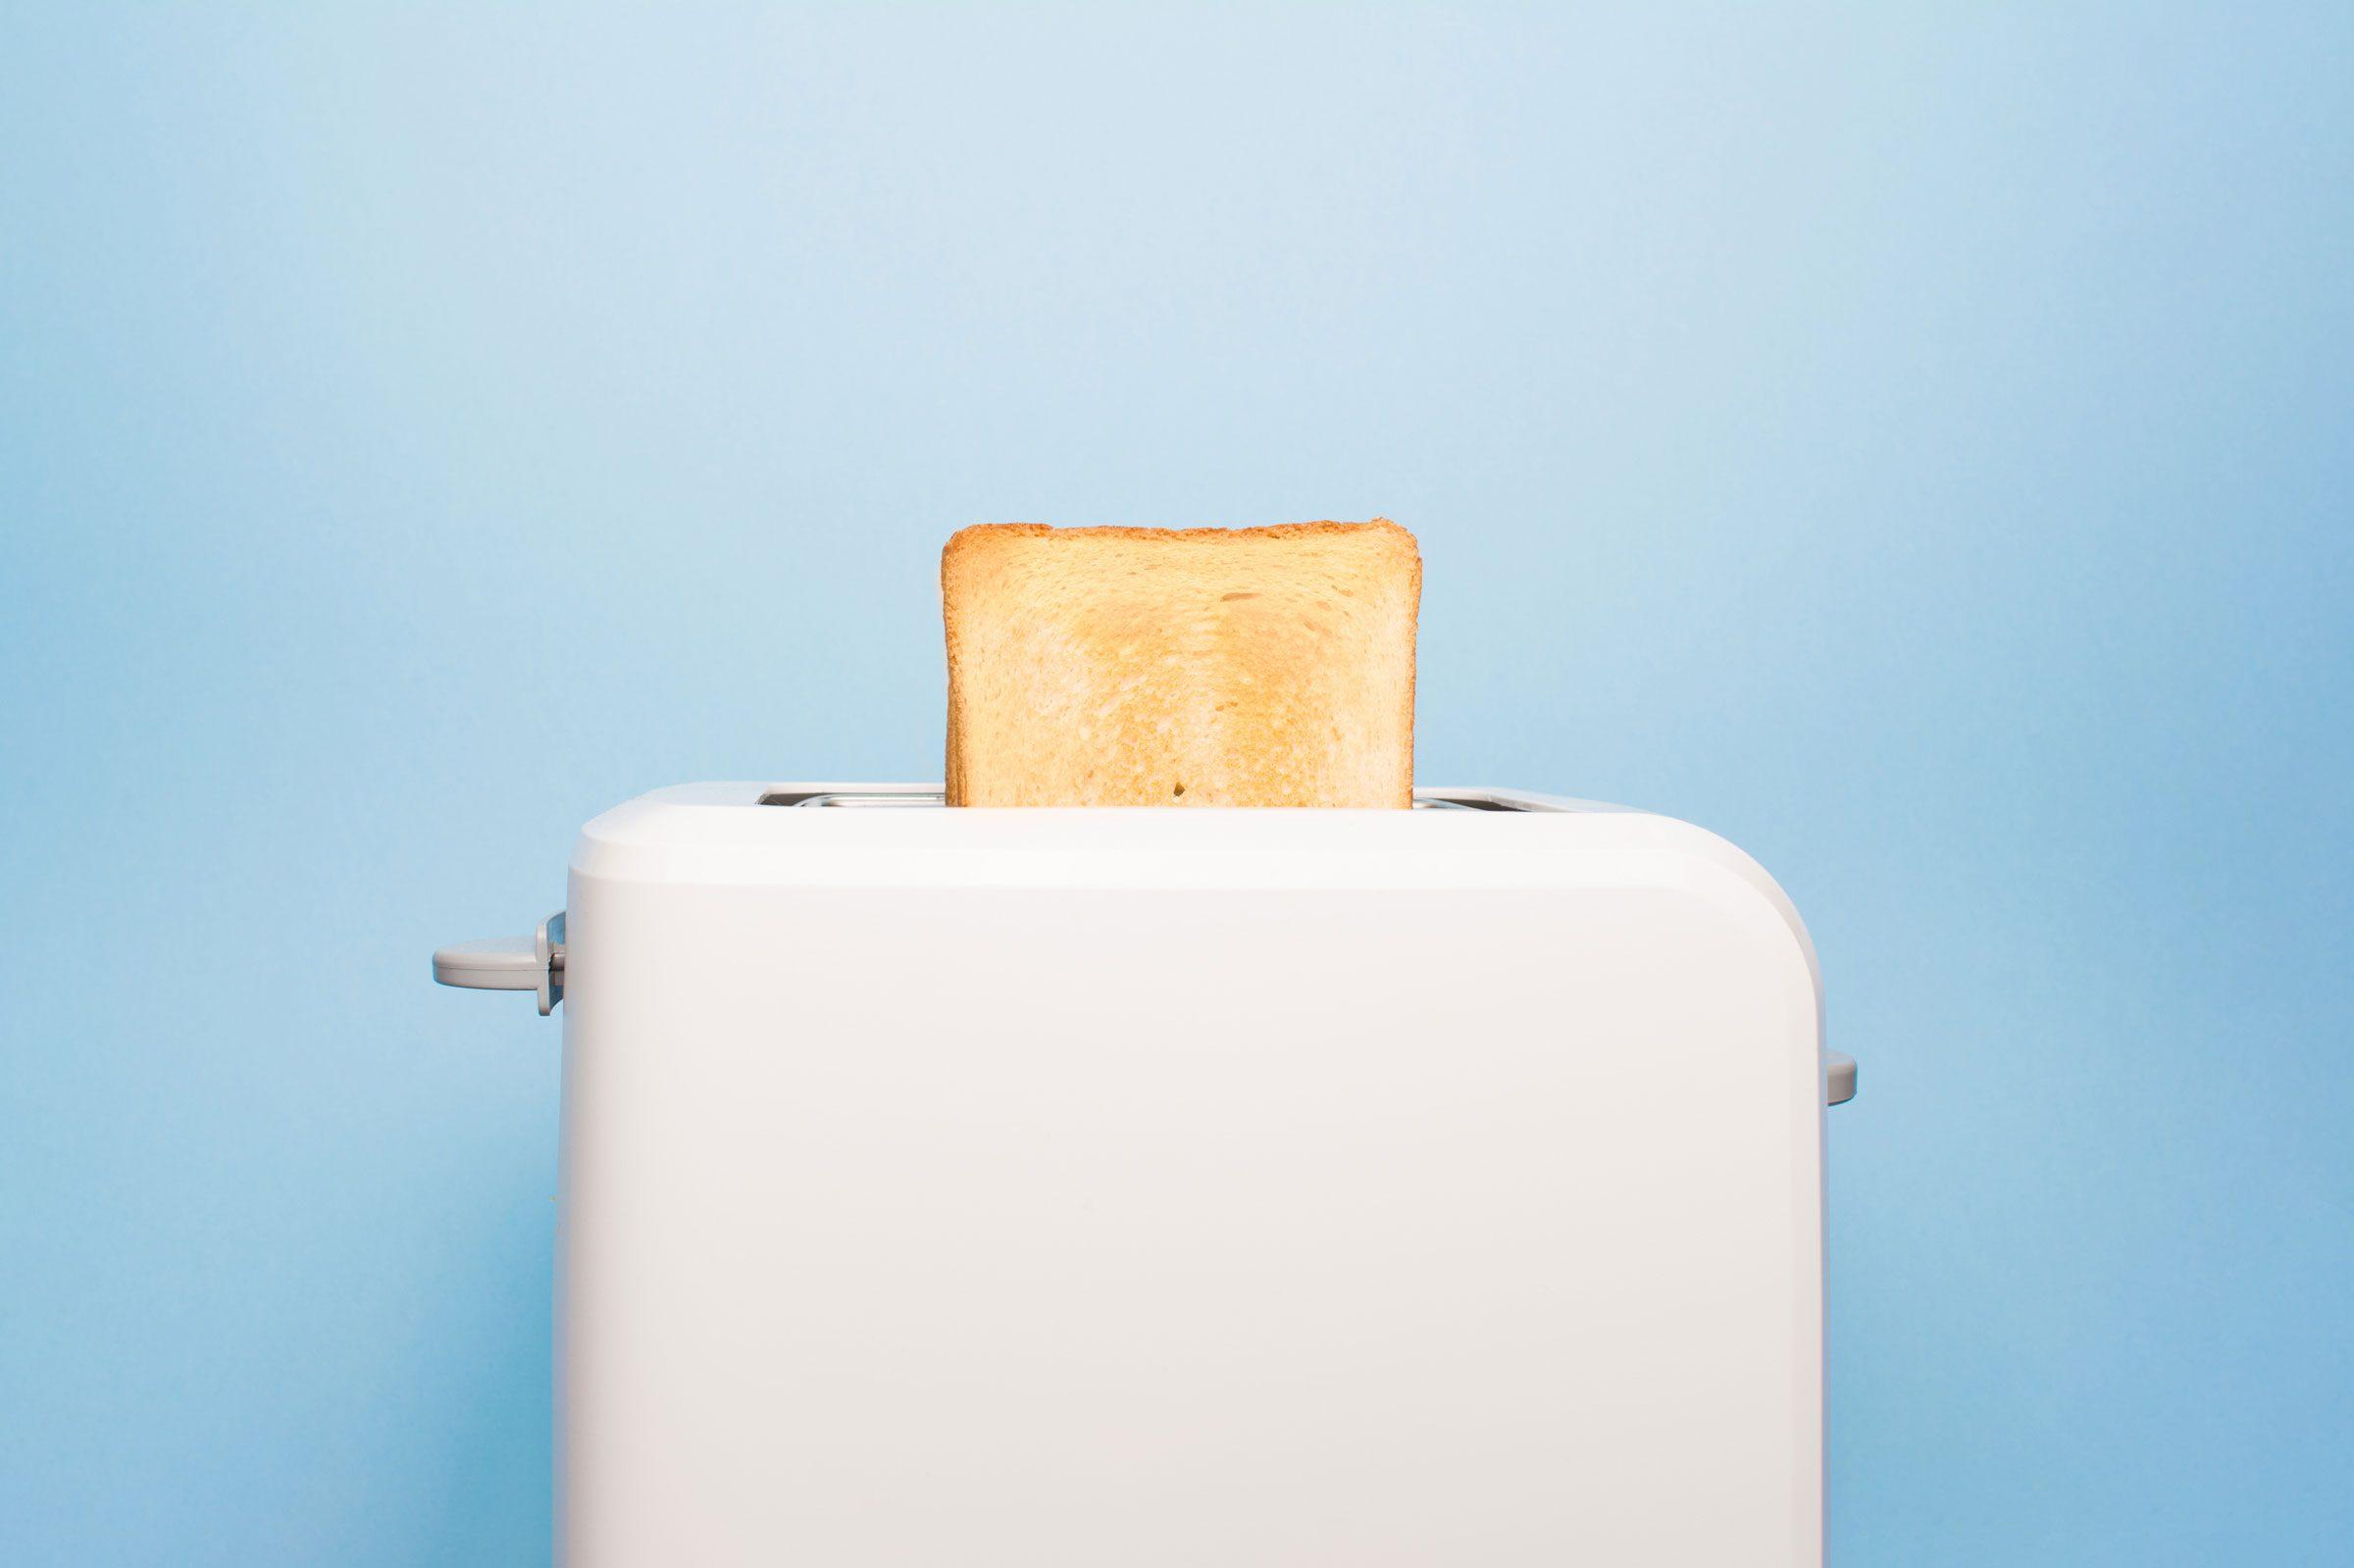 https://www.rd.com/wp-content/uploads/2023/03/GettyImages-1053121332-toaster.jpg